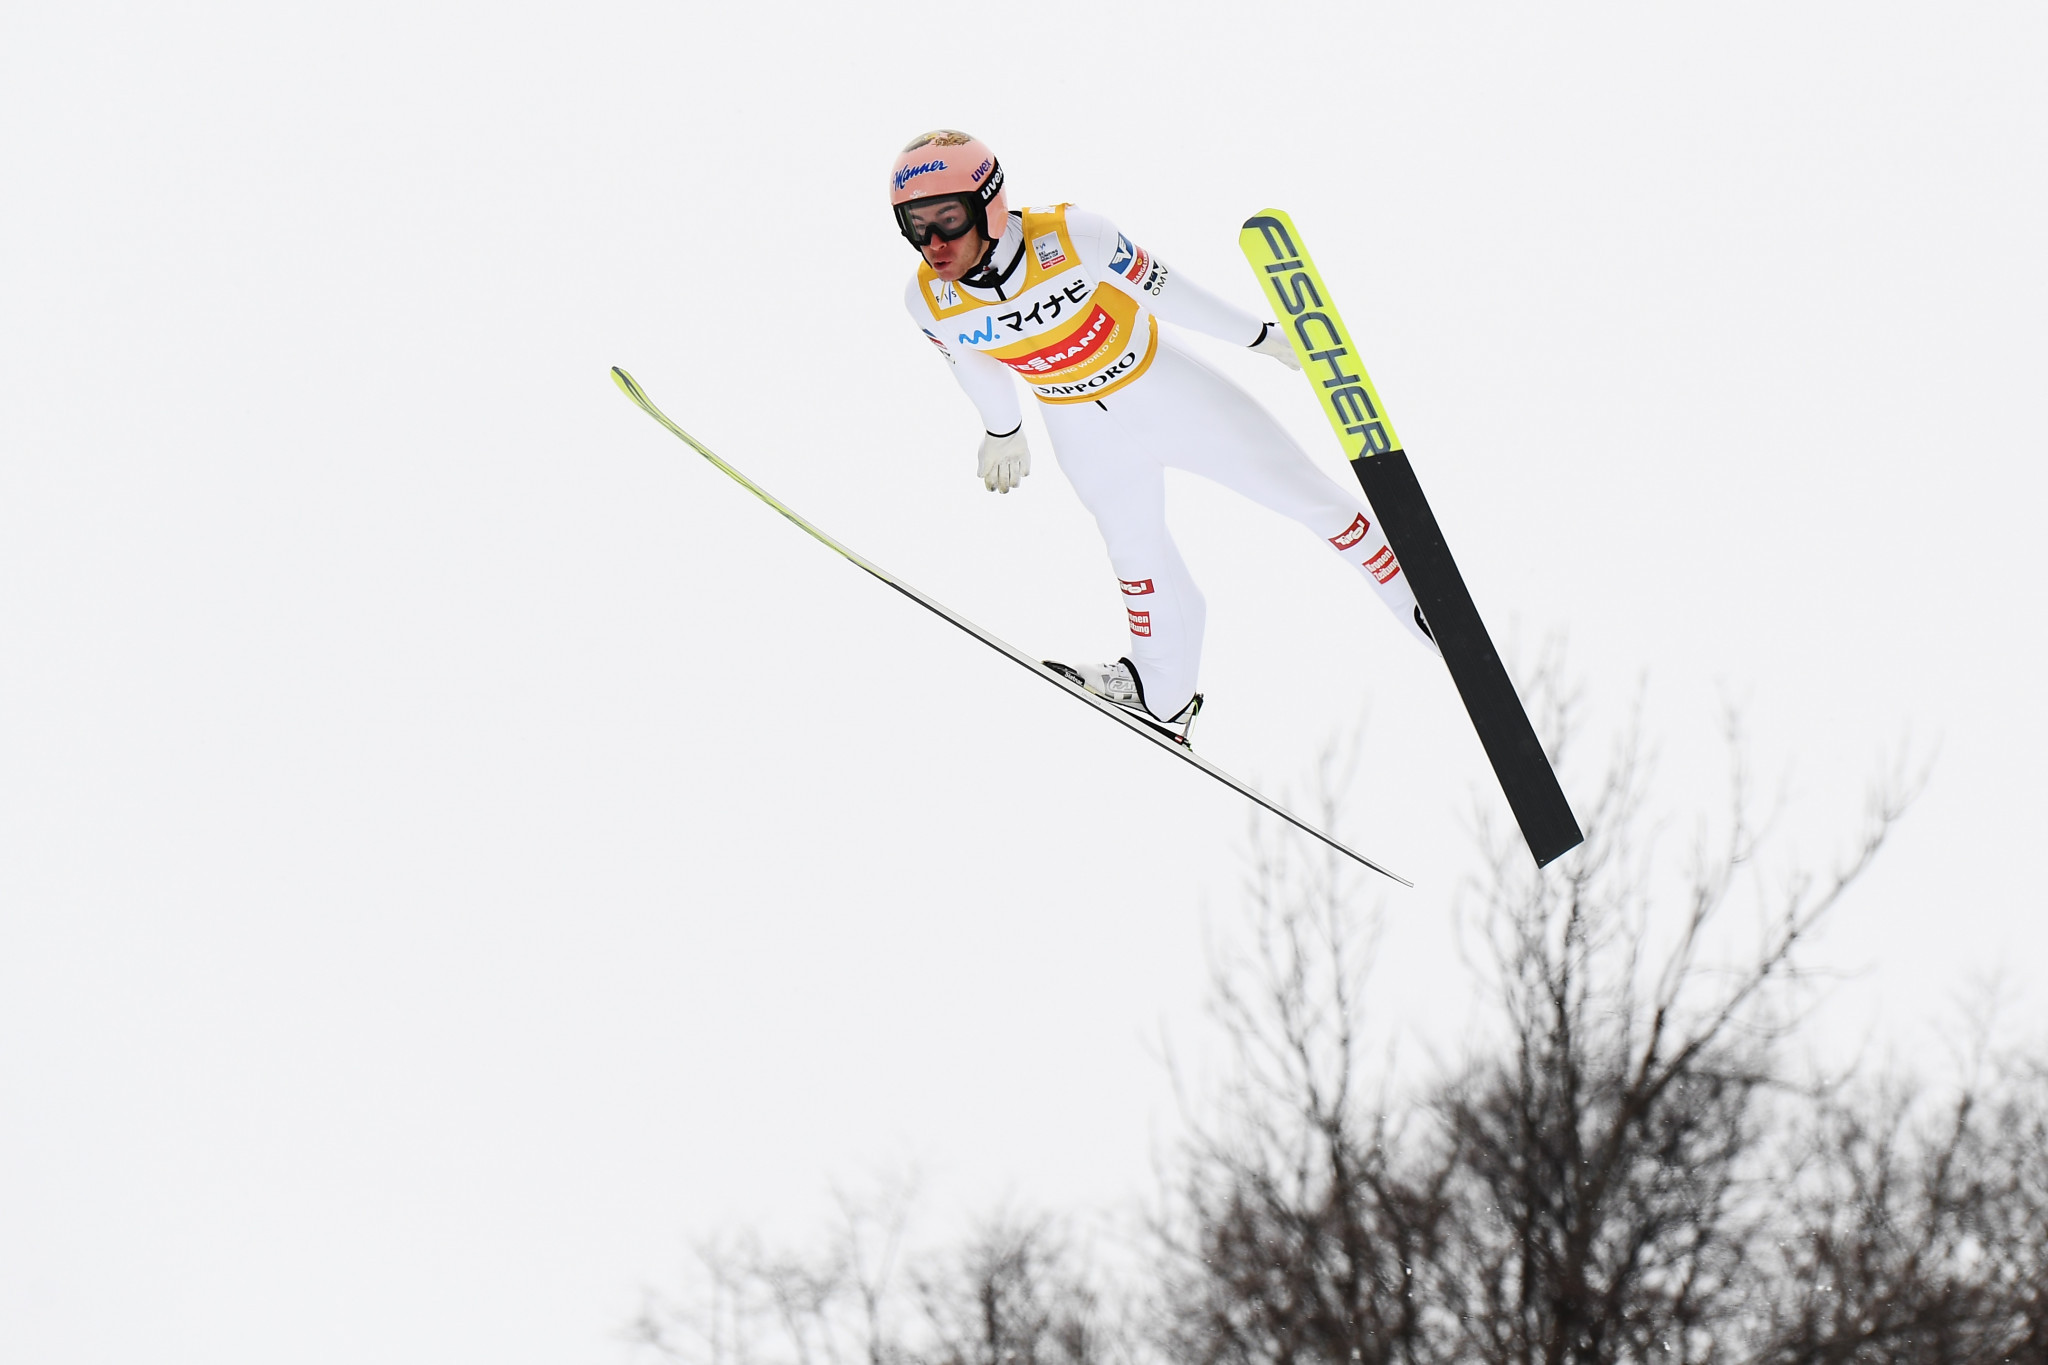 Stefan Kraft extends FIS Ski Jumping World Cup lead with Sapporo win